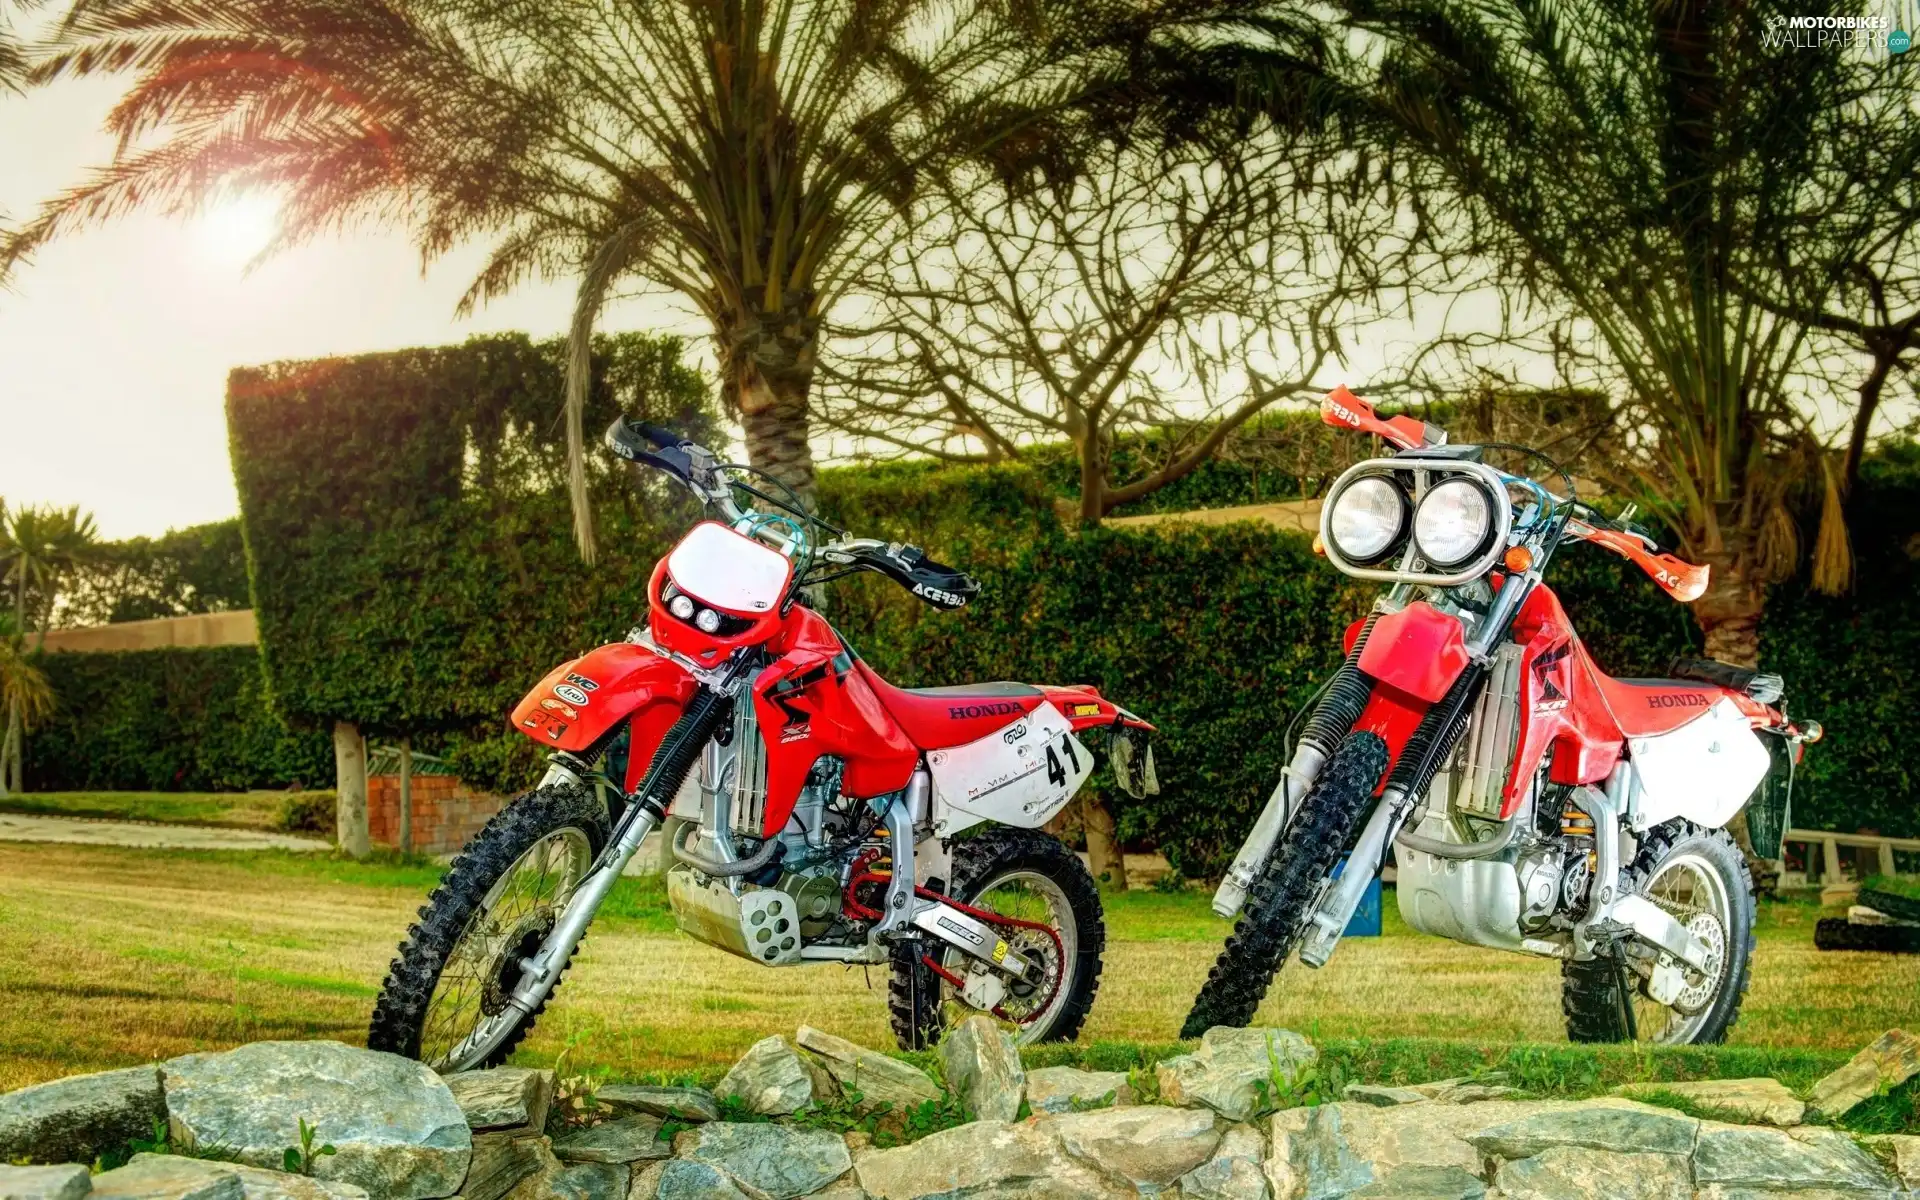 Palms, Stones, Motorcycles, Honda XR, Two cars